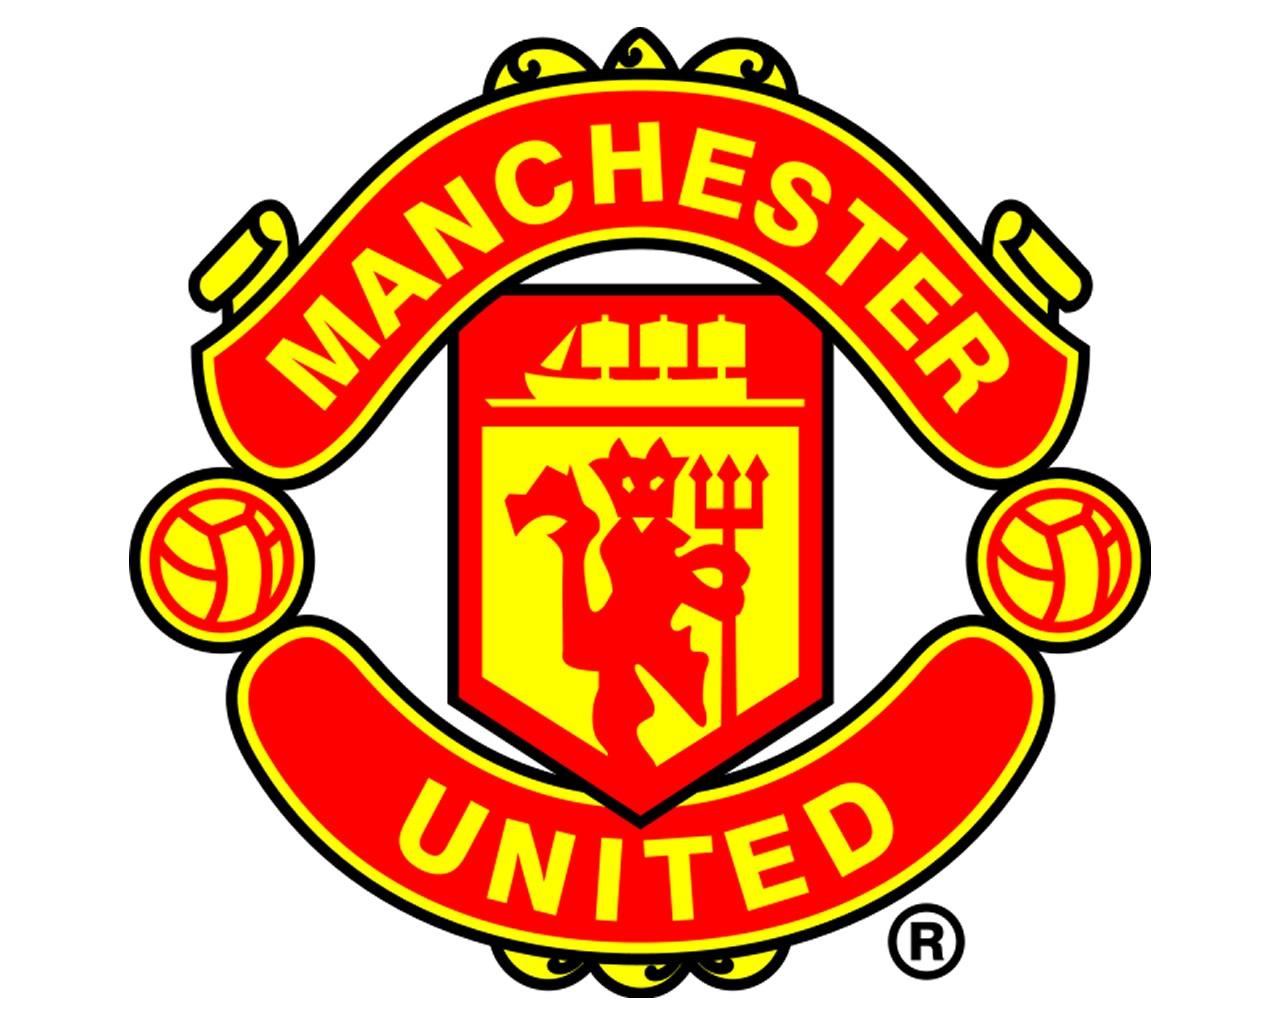 Manchester United Fc Logo Wallpaper Photo Shared By Preston6 Fans